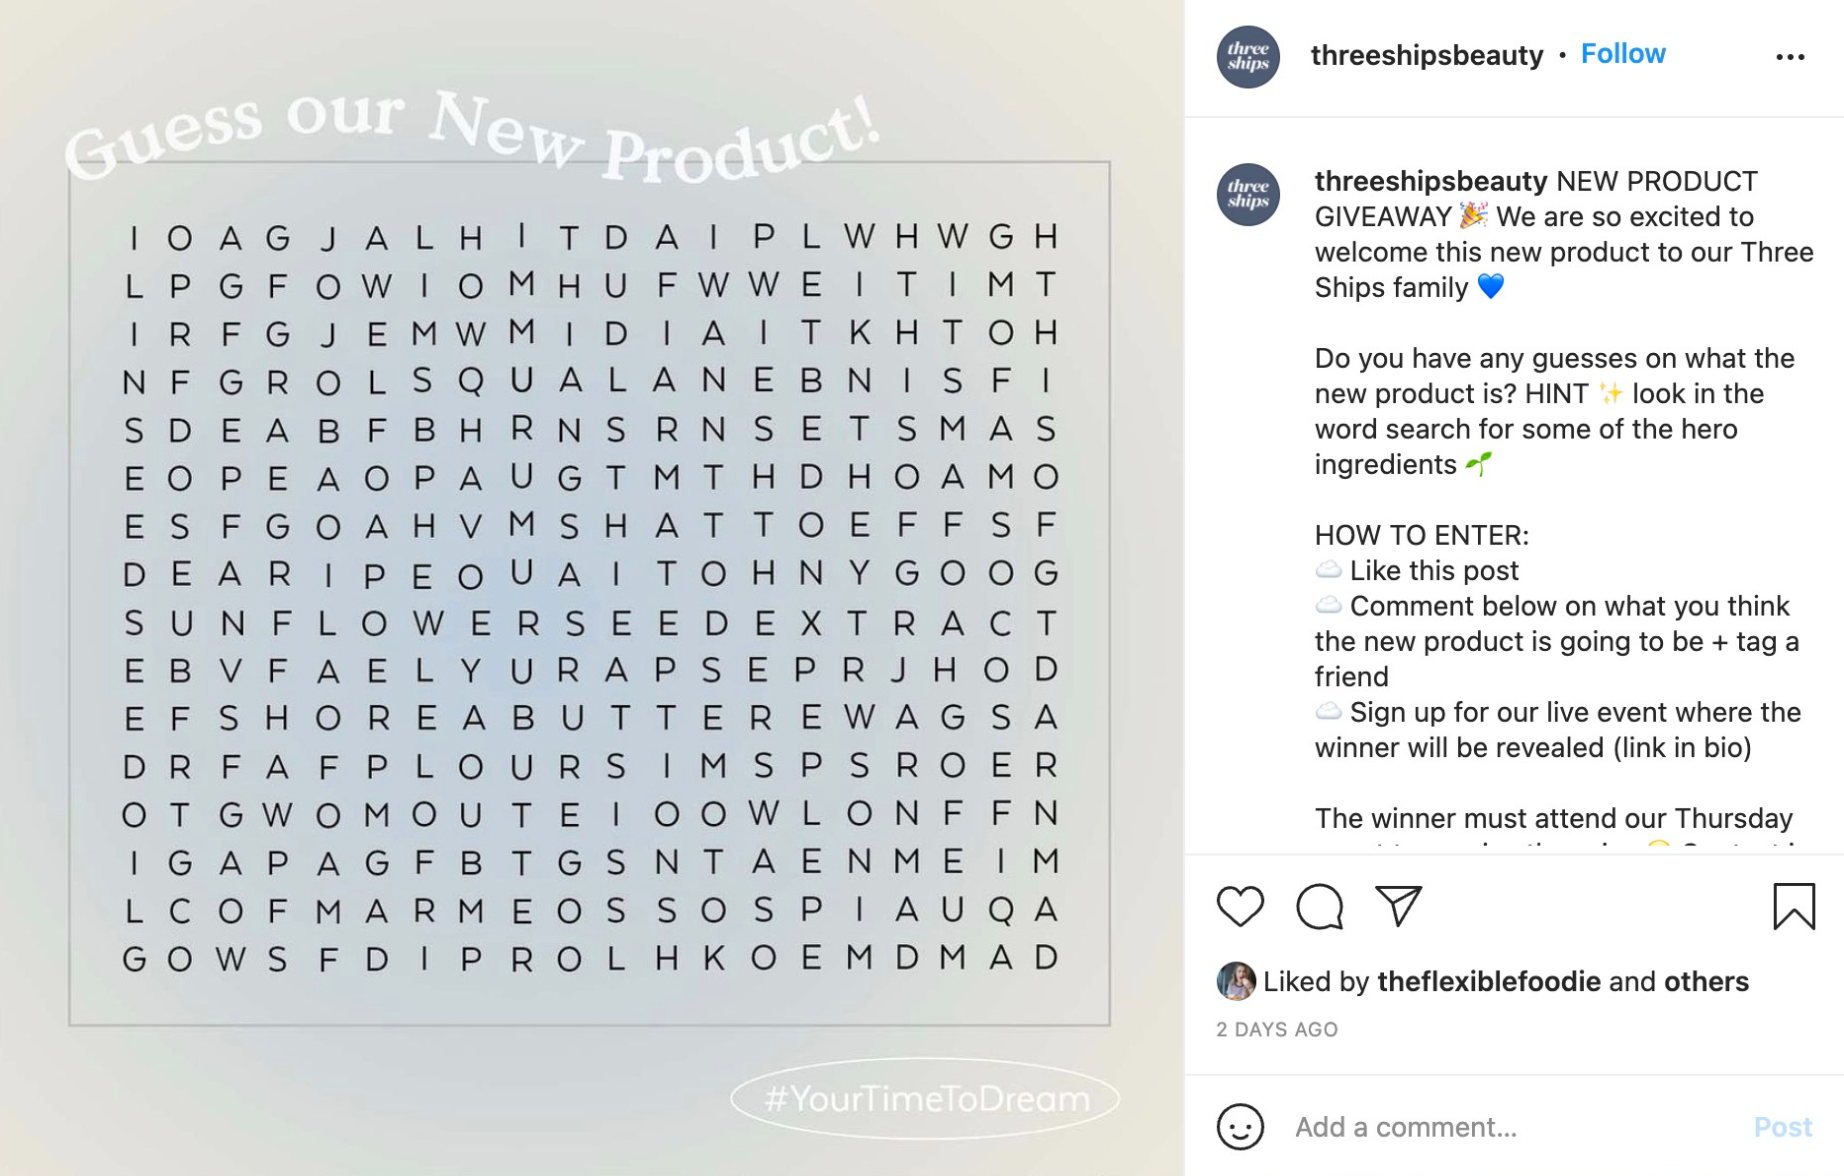 Screenshot from Three Ships' Instagram post where they're teasing their new product launch. They share a word search game and ask customers to see if they can find their new product in it.